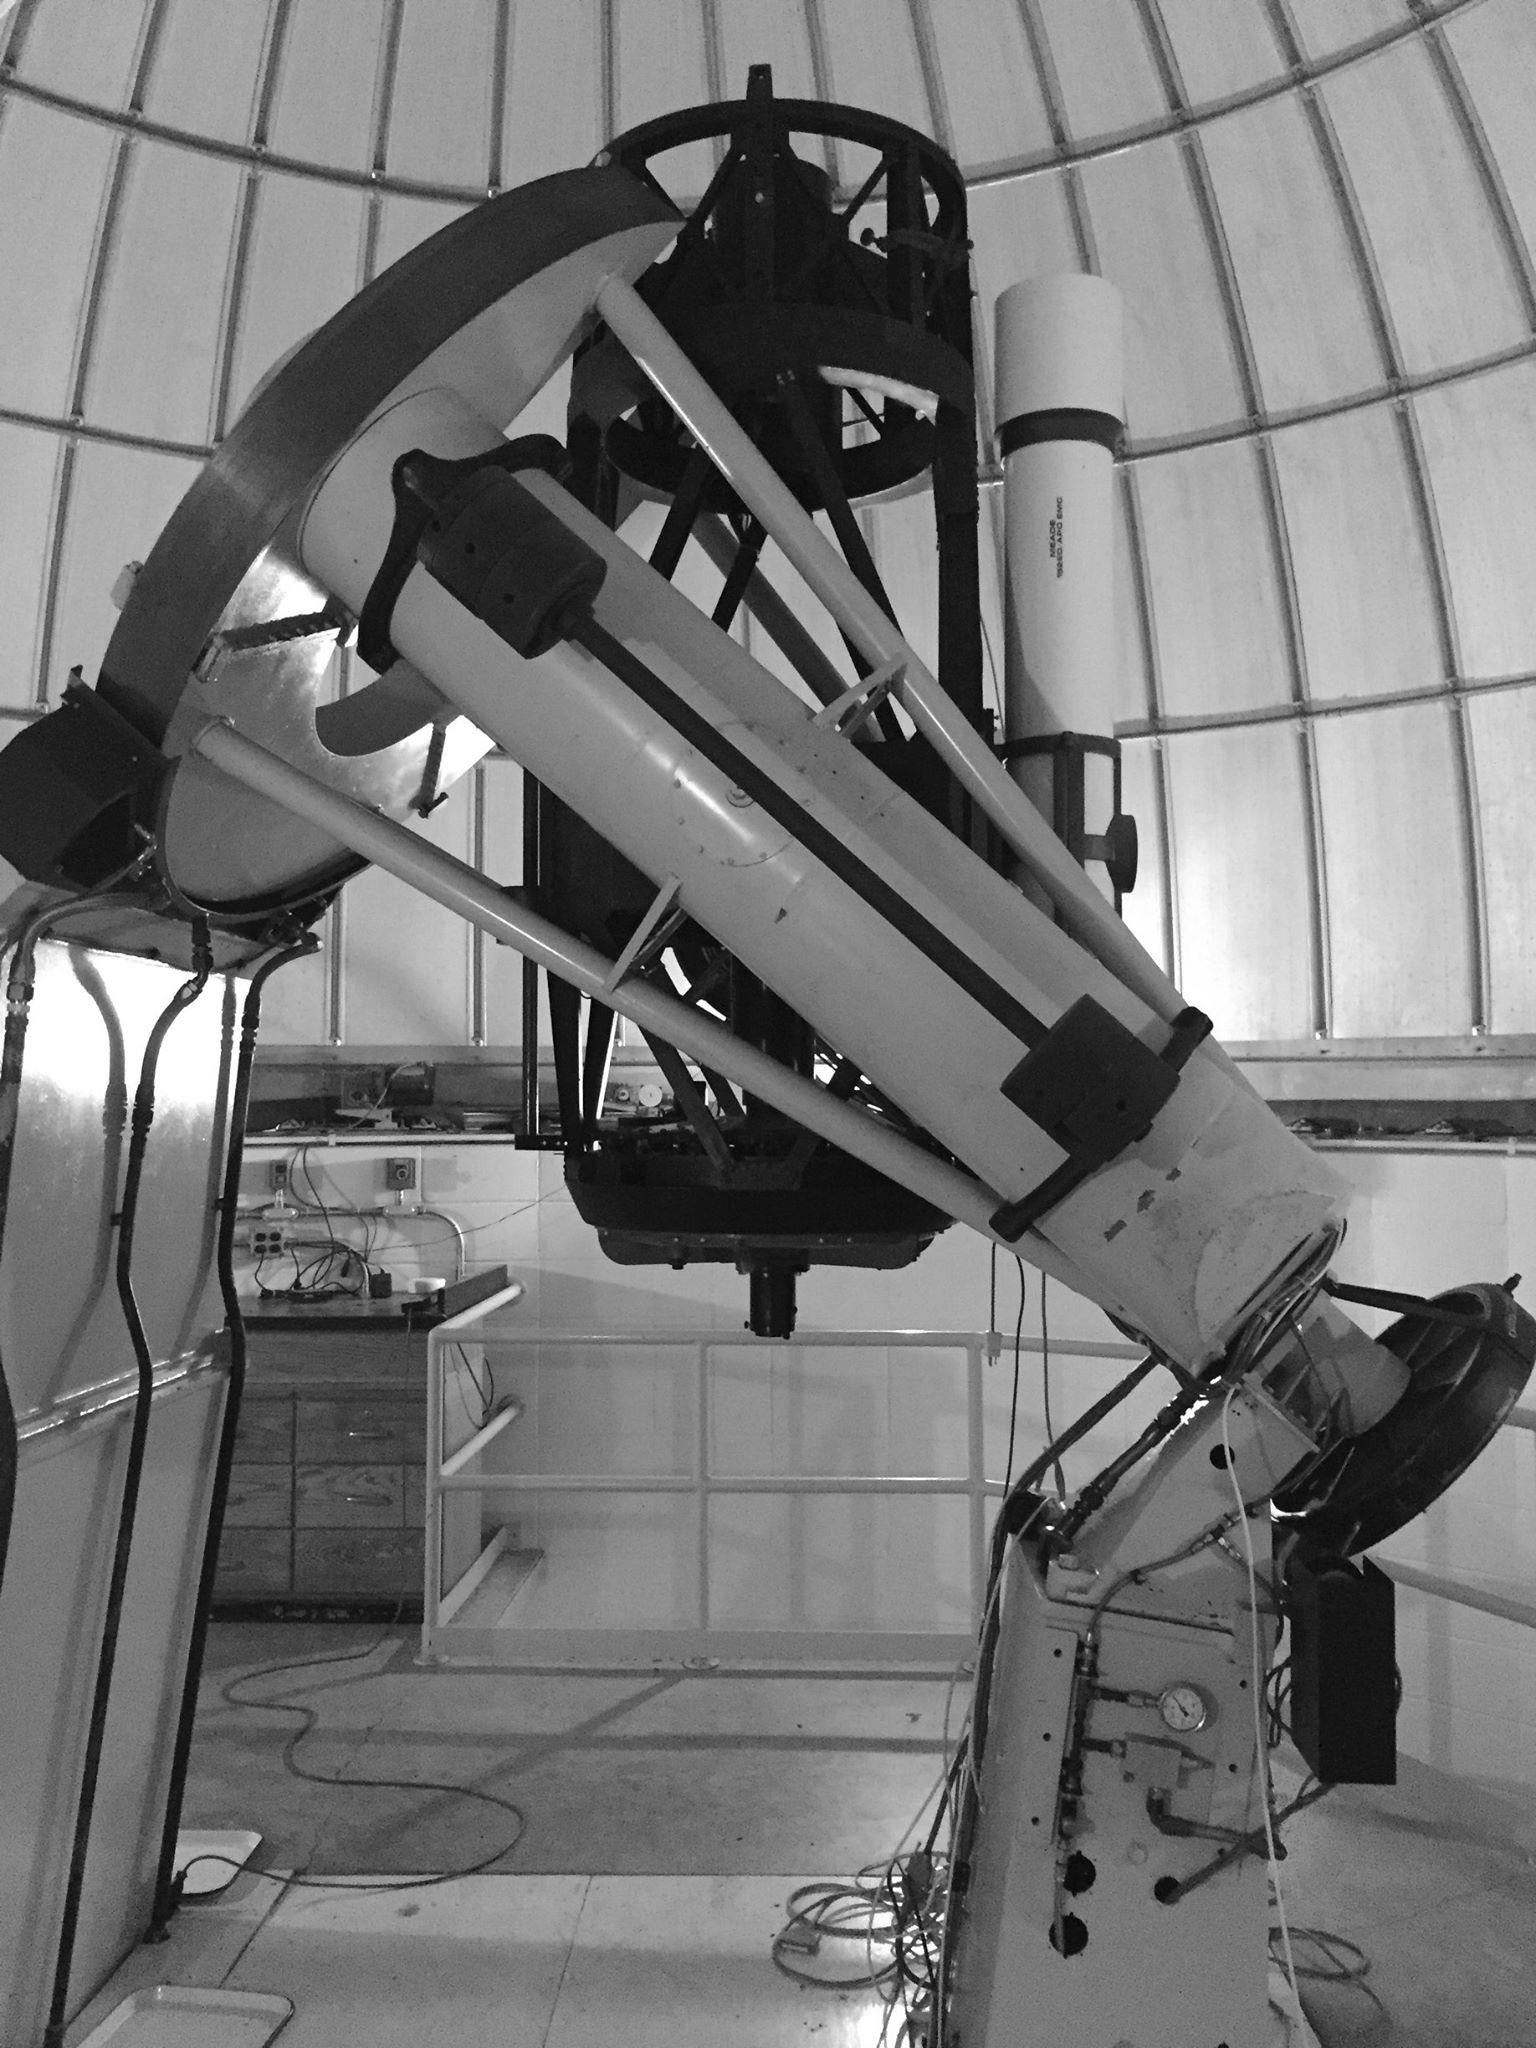 Corning Community College's one-tenth scale model of the 200-inch Hale Telescope at Mt. Palomar, CA